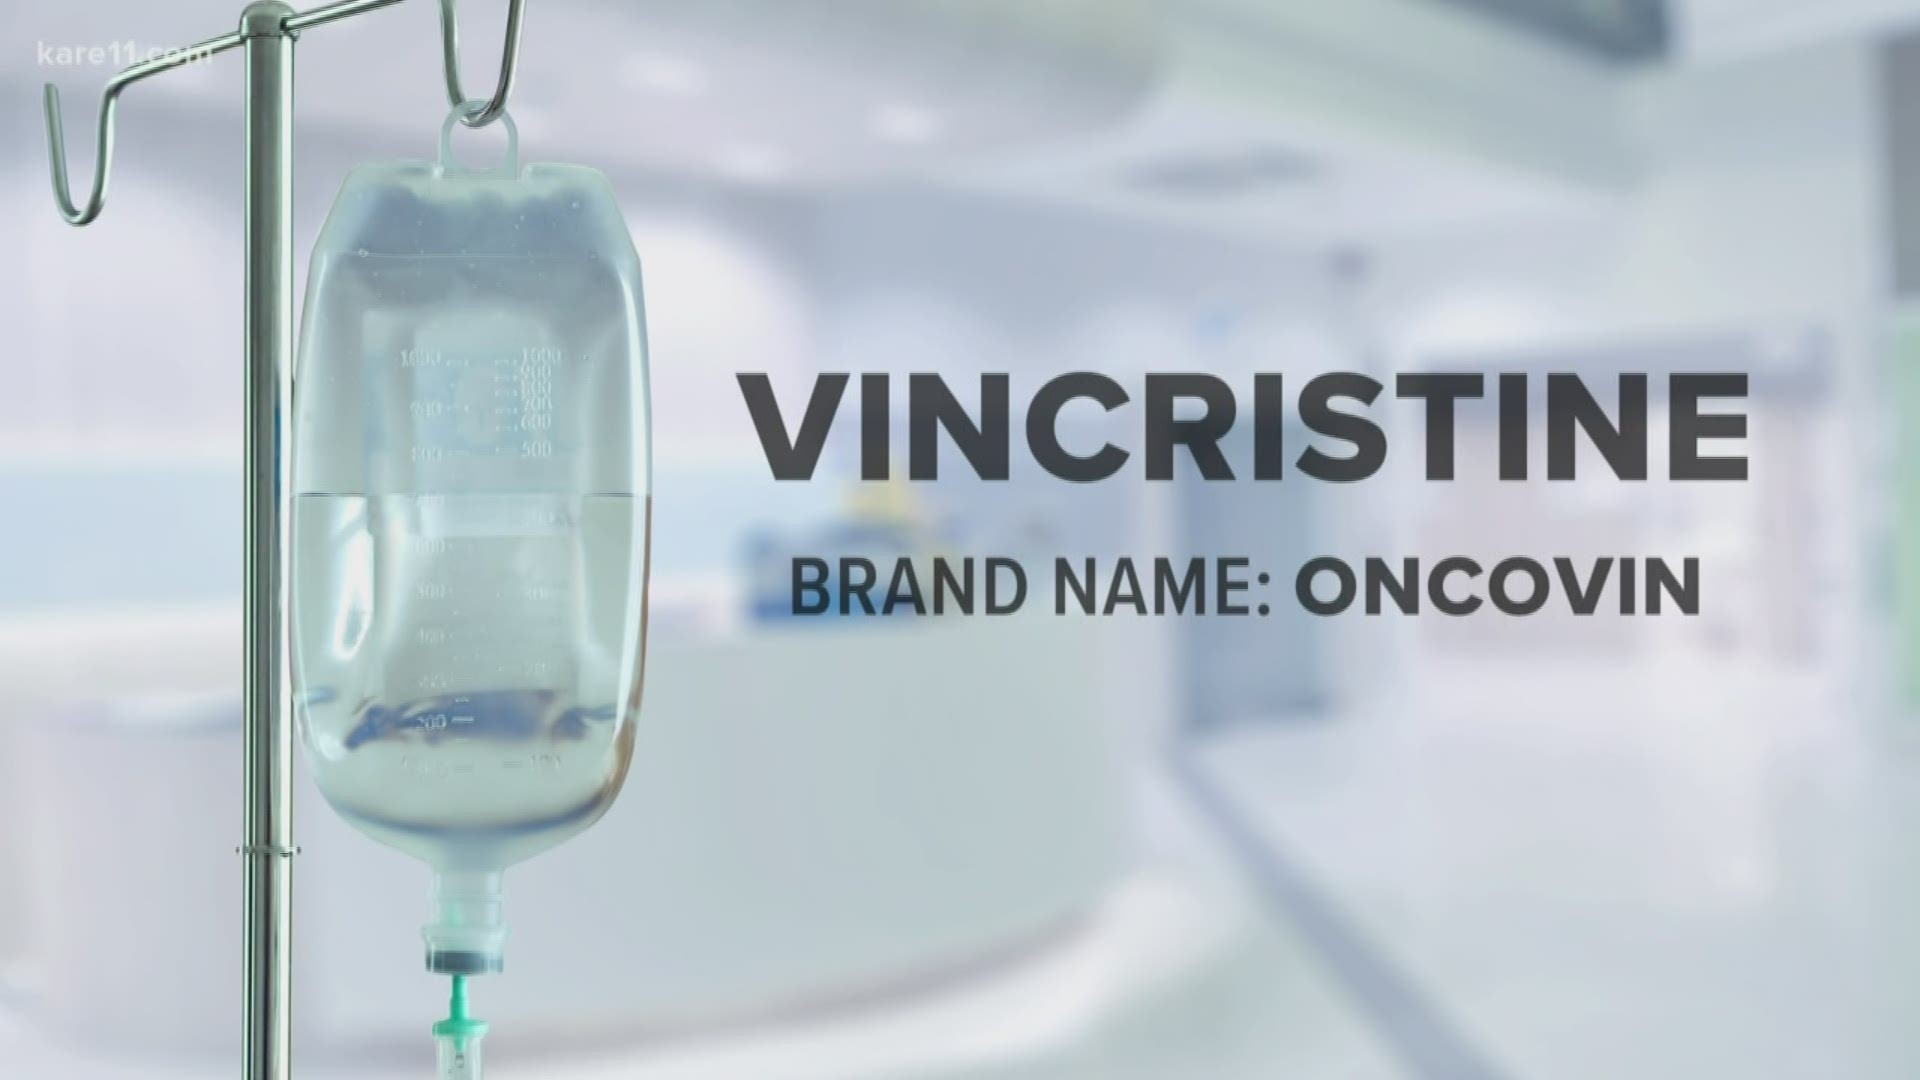 Vincristine is a crucial drug that is used in therapies for Leukemia, Lymphoma and most other childhood cancers.